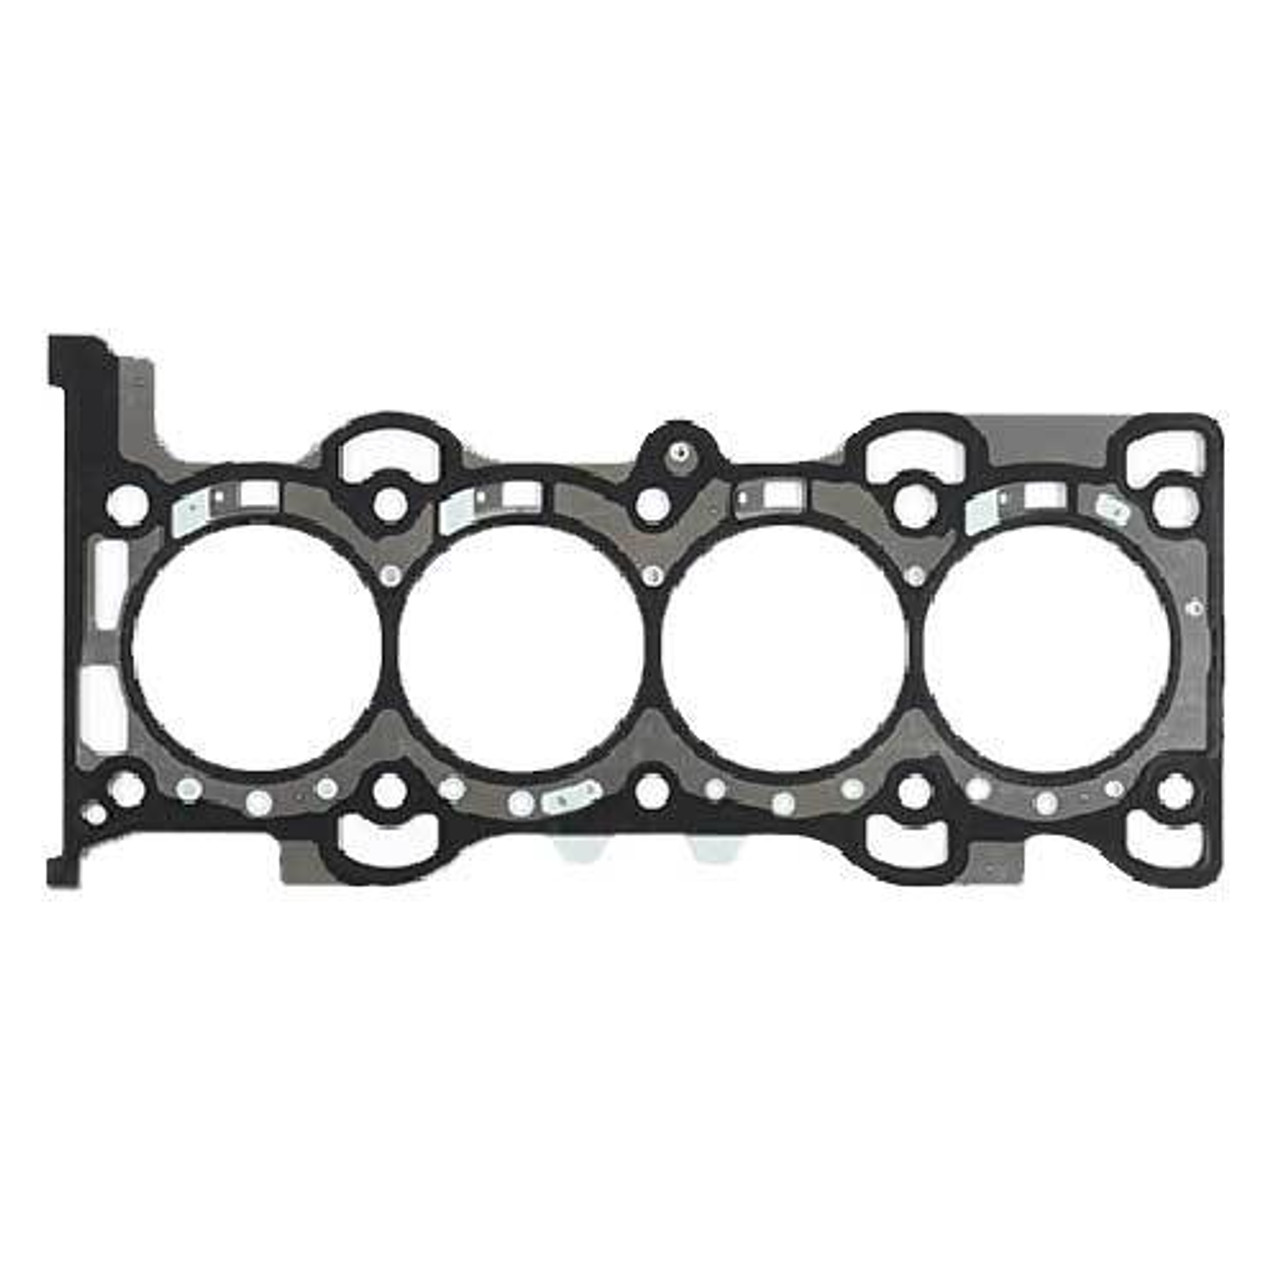 Head Gasket - 2014 Ford Fusion 2.0L Engine Parts # HG4235ZE16